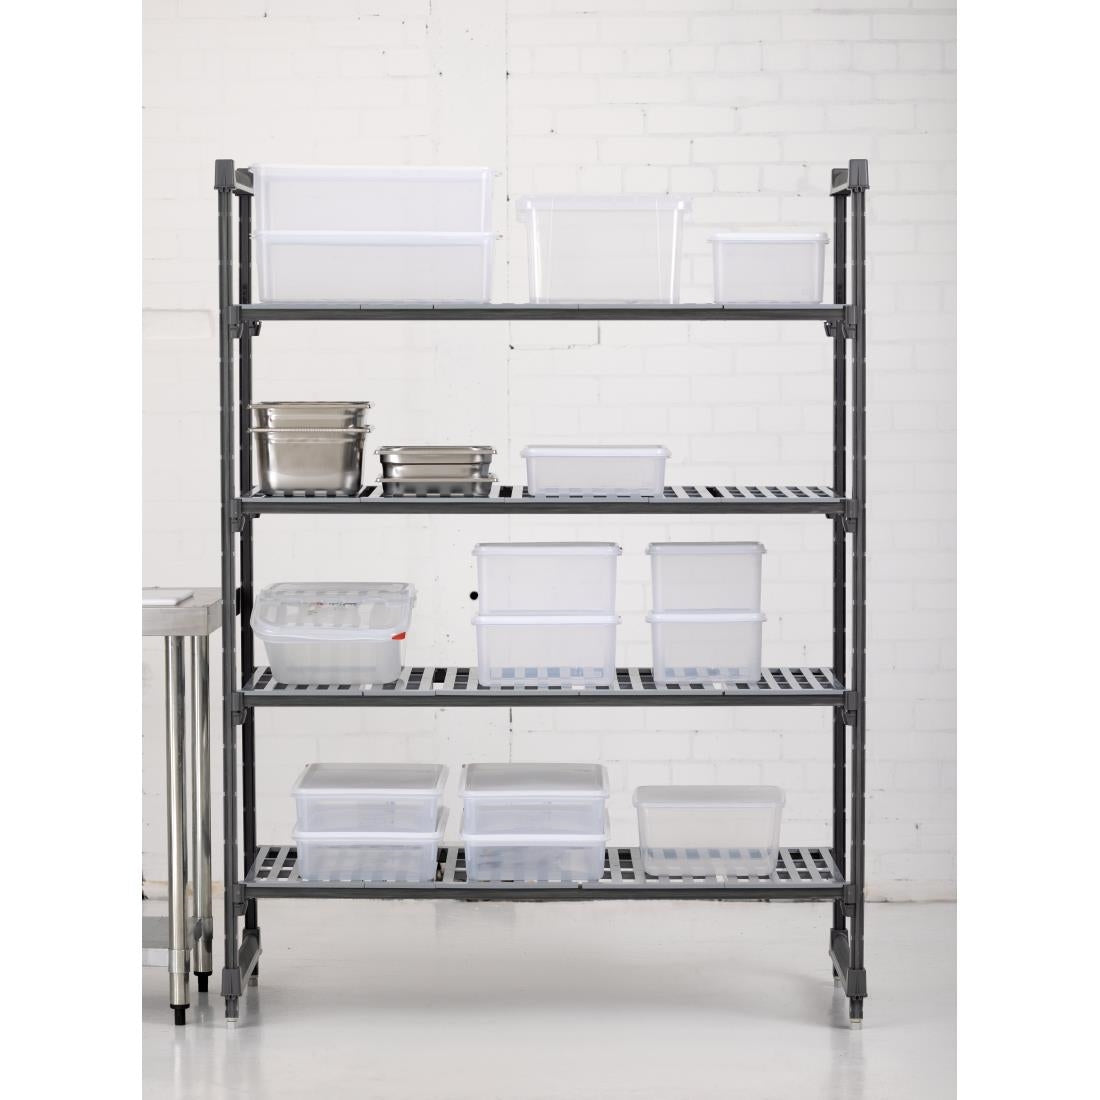 DM775 Cambro Stationary Vented 4 Shelf Starter Units 1830 x 1375 x 610mm JD Catering Equipment Solutions Ltd